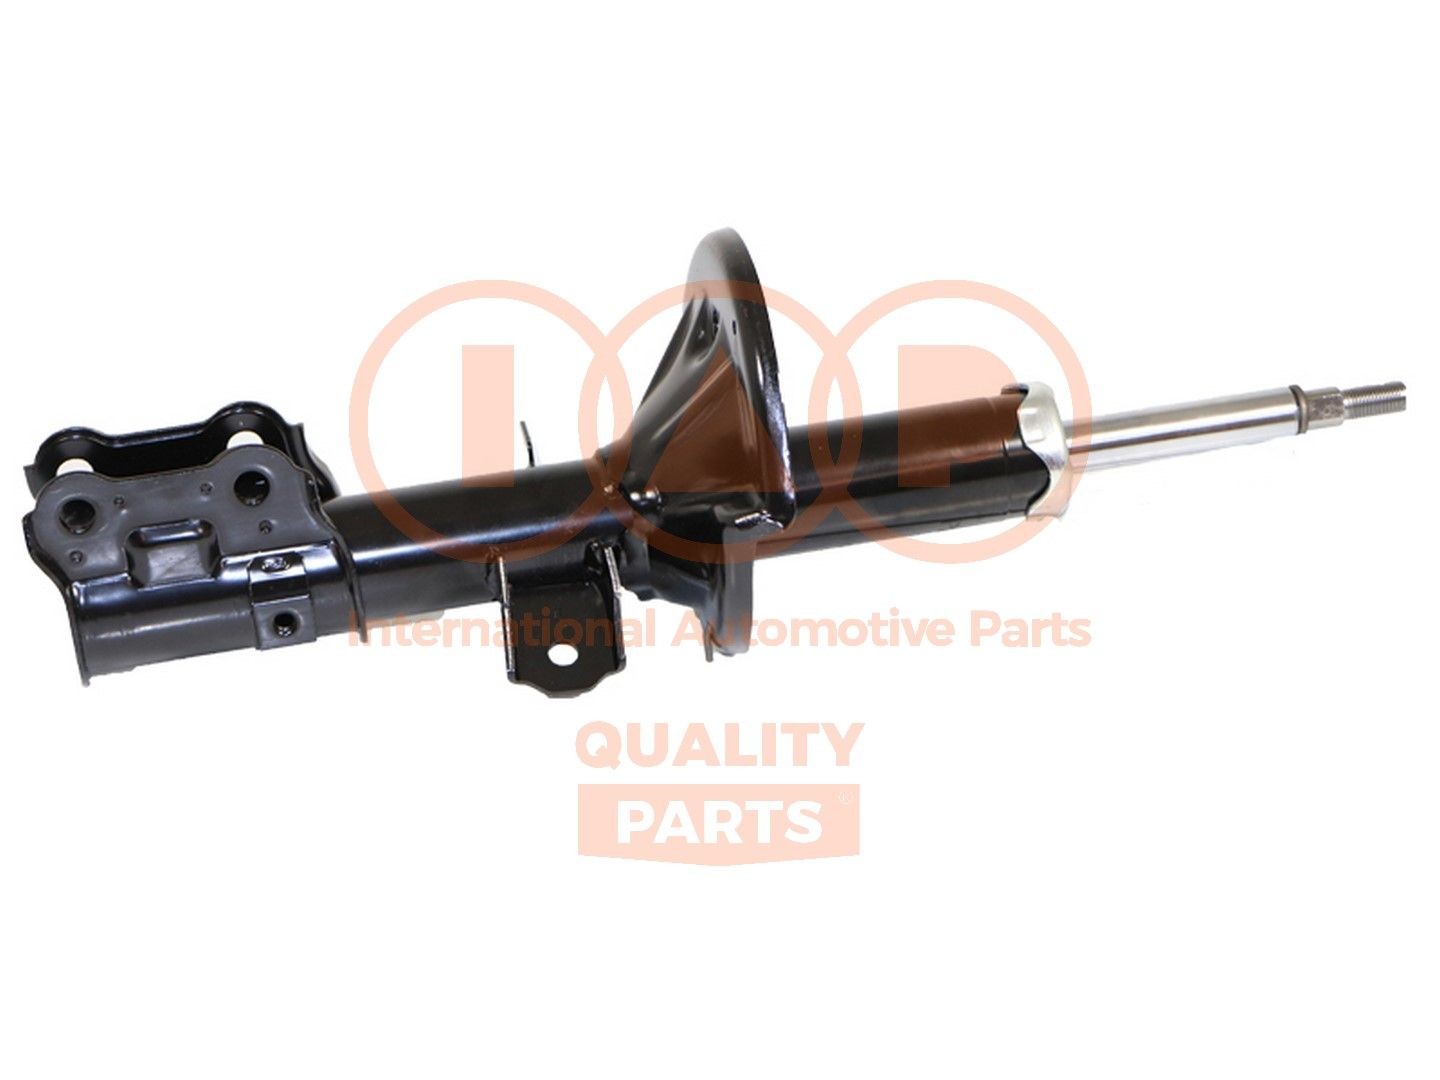 IAP QUALITY PARTS Front Axle Right, Gas Pressure, Suspension Strut, Top pin Shocks 504-07144 buy